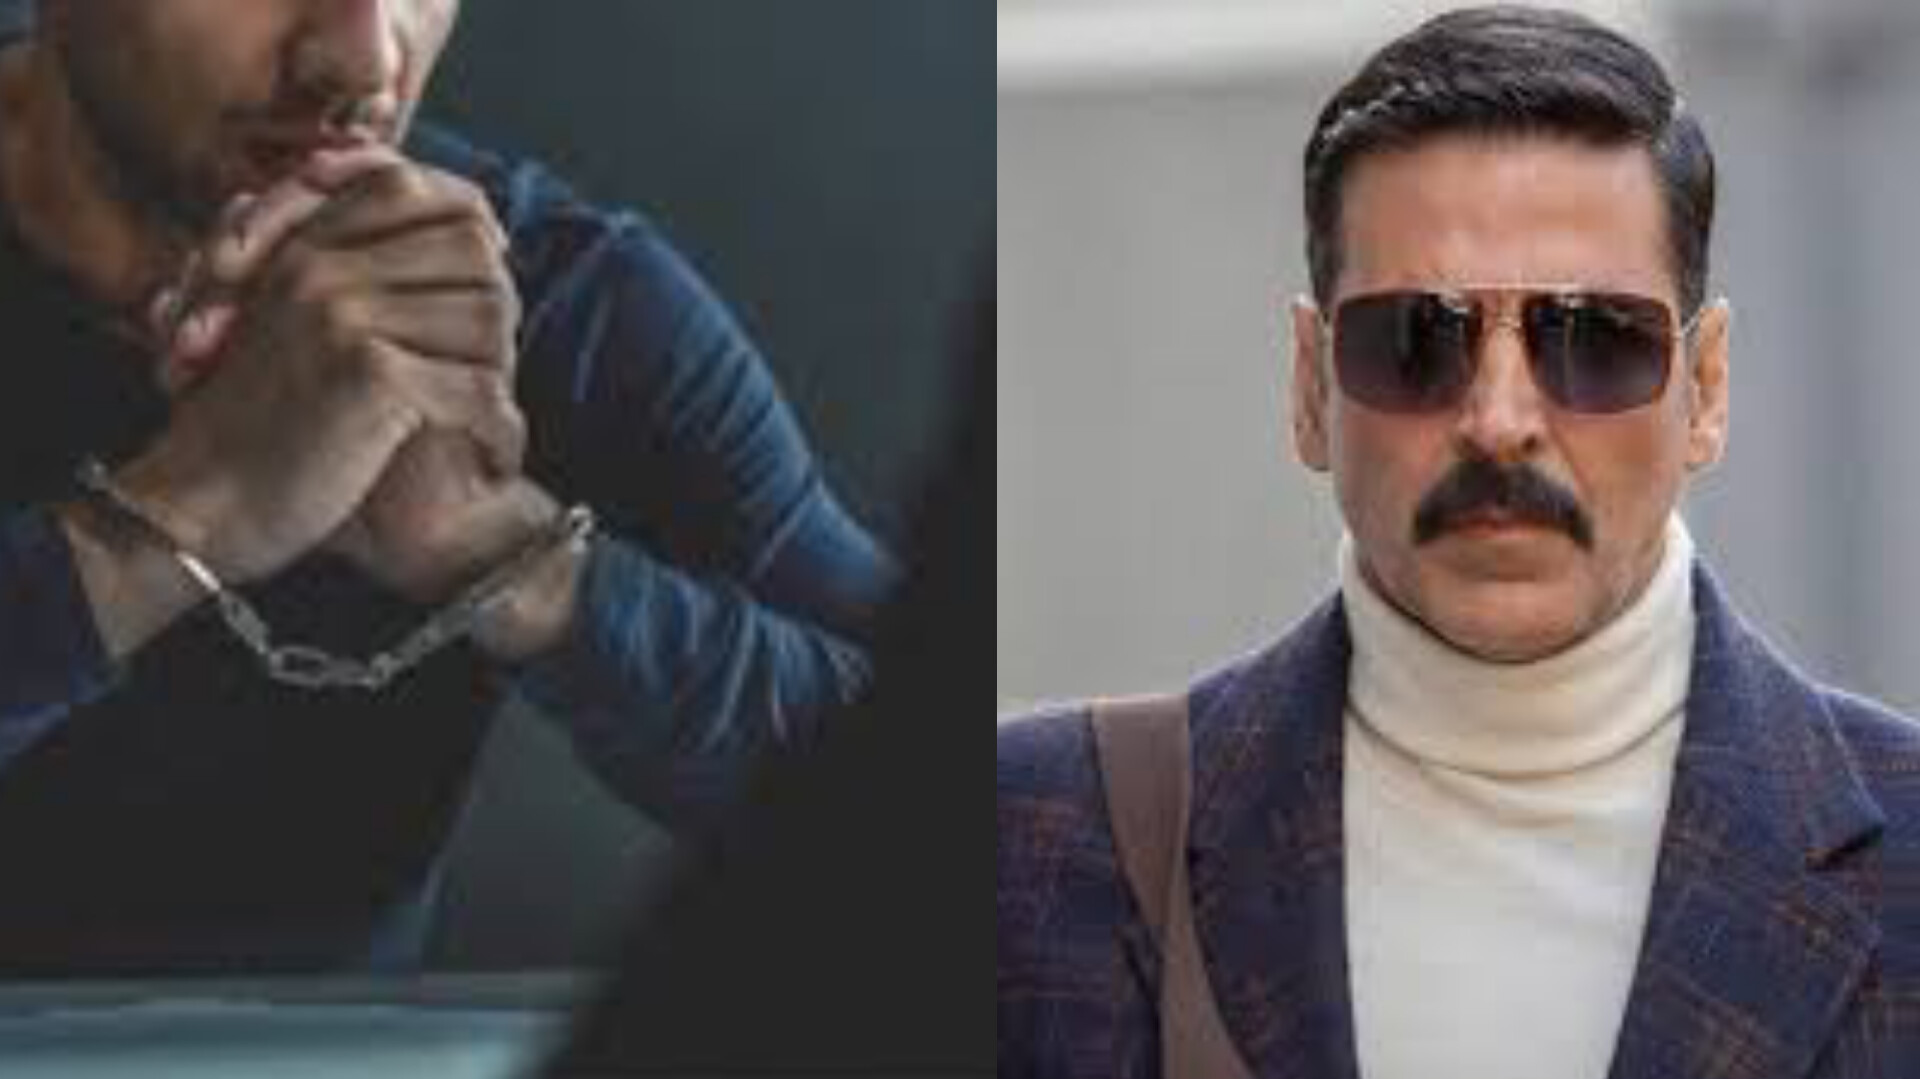 Akshay Kumar, Fraud, Entertainment Industry, Deception, Scam, False Identity, Celebrity Impersonation, Pooja Anandani, identity fraud,law and crime network,fraud case,crime,police chase,police, Maharashtra Police, Juhu Police, Bollywood, Akshay Kumar's production house, Akshay Kumar's name, Cape of Good Films,